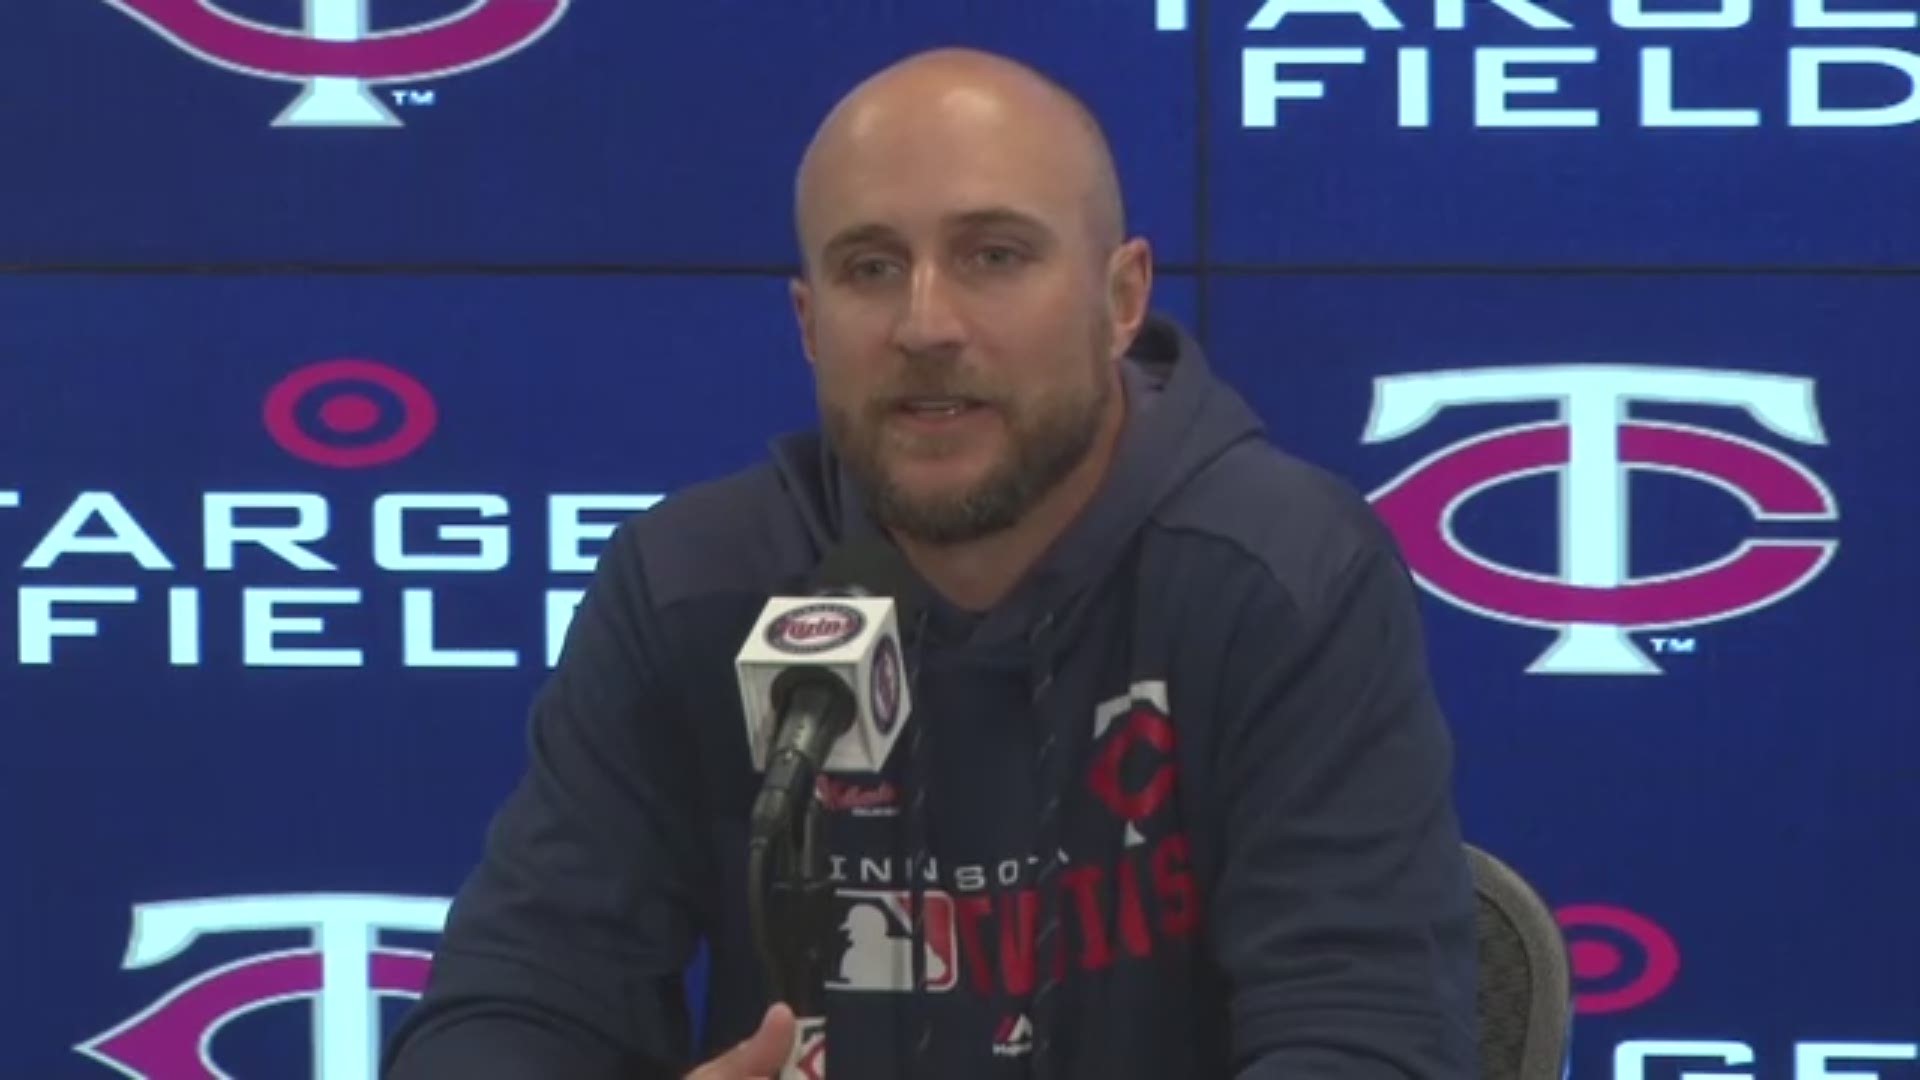 The Twins talk about the start of the 2019 season.